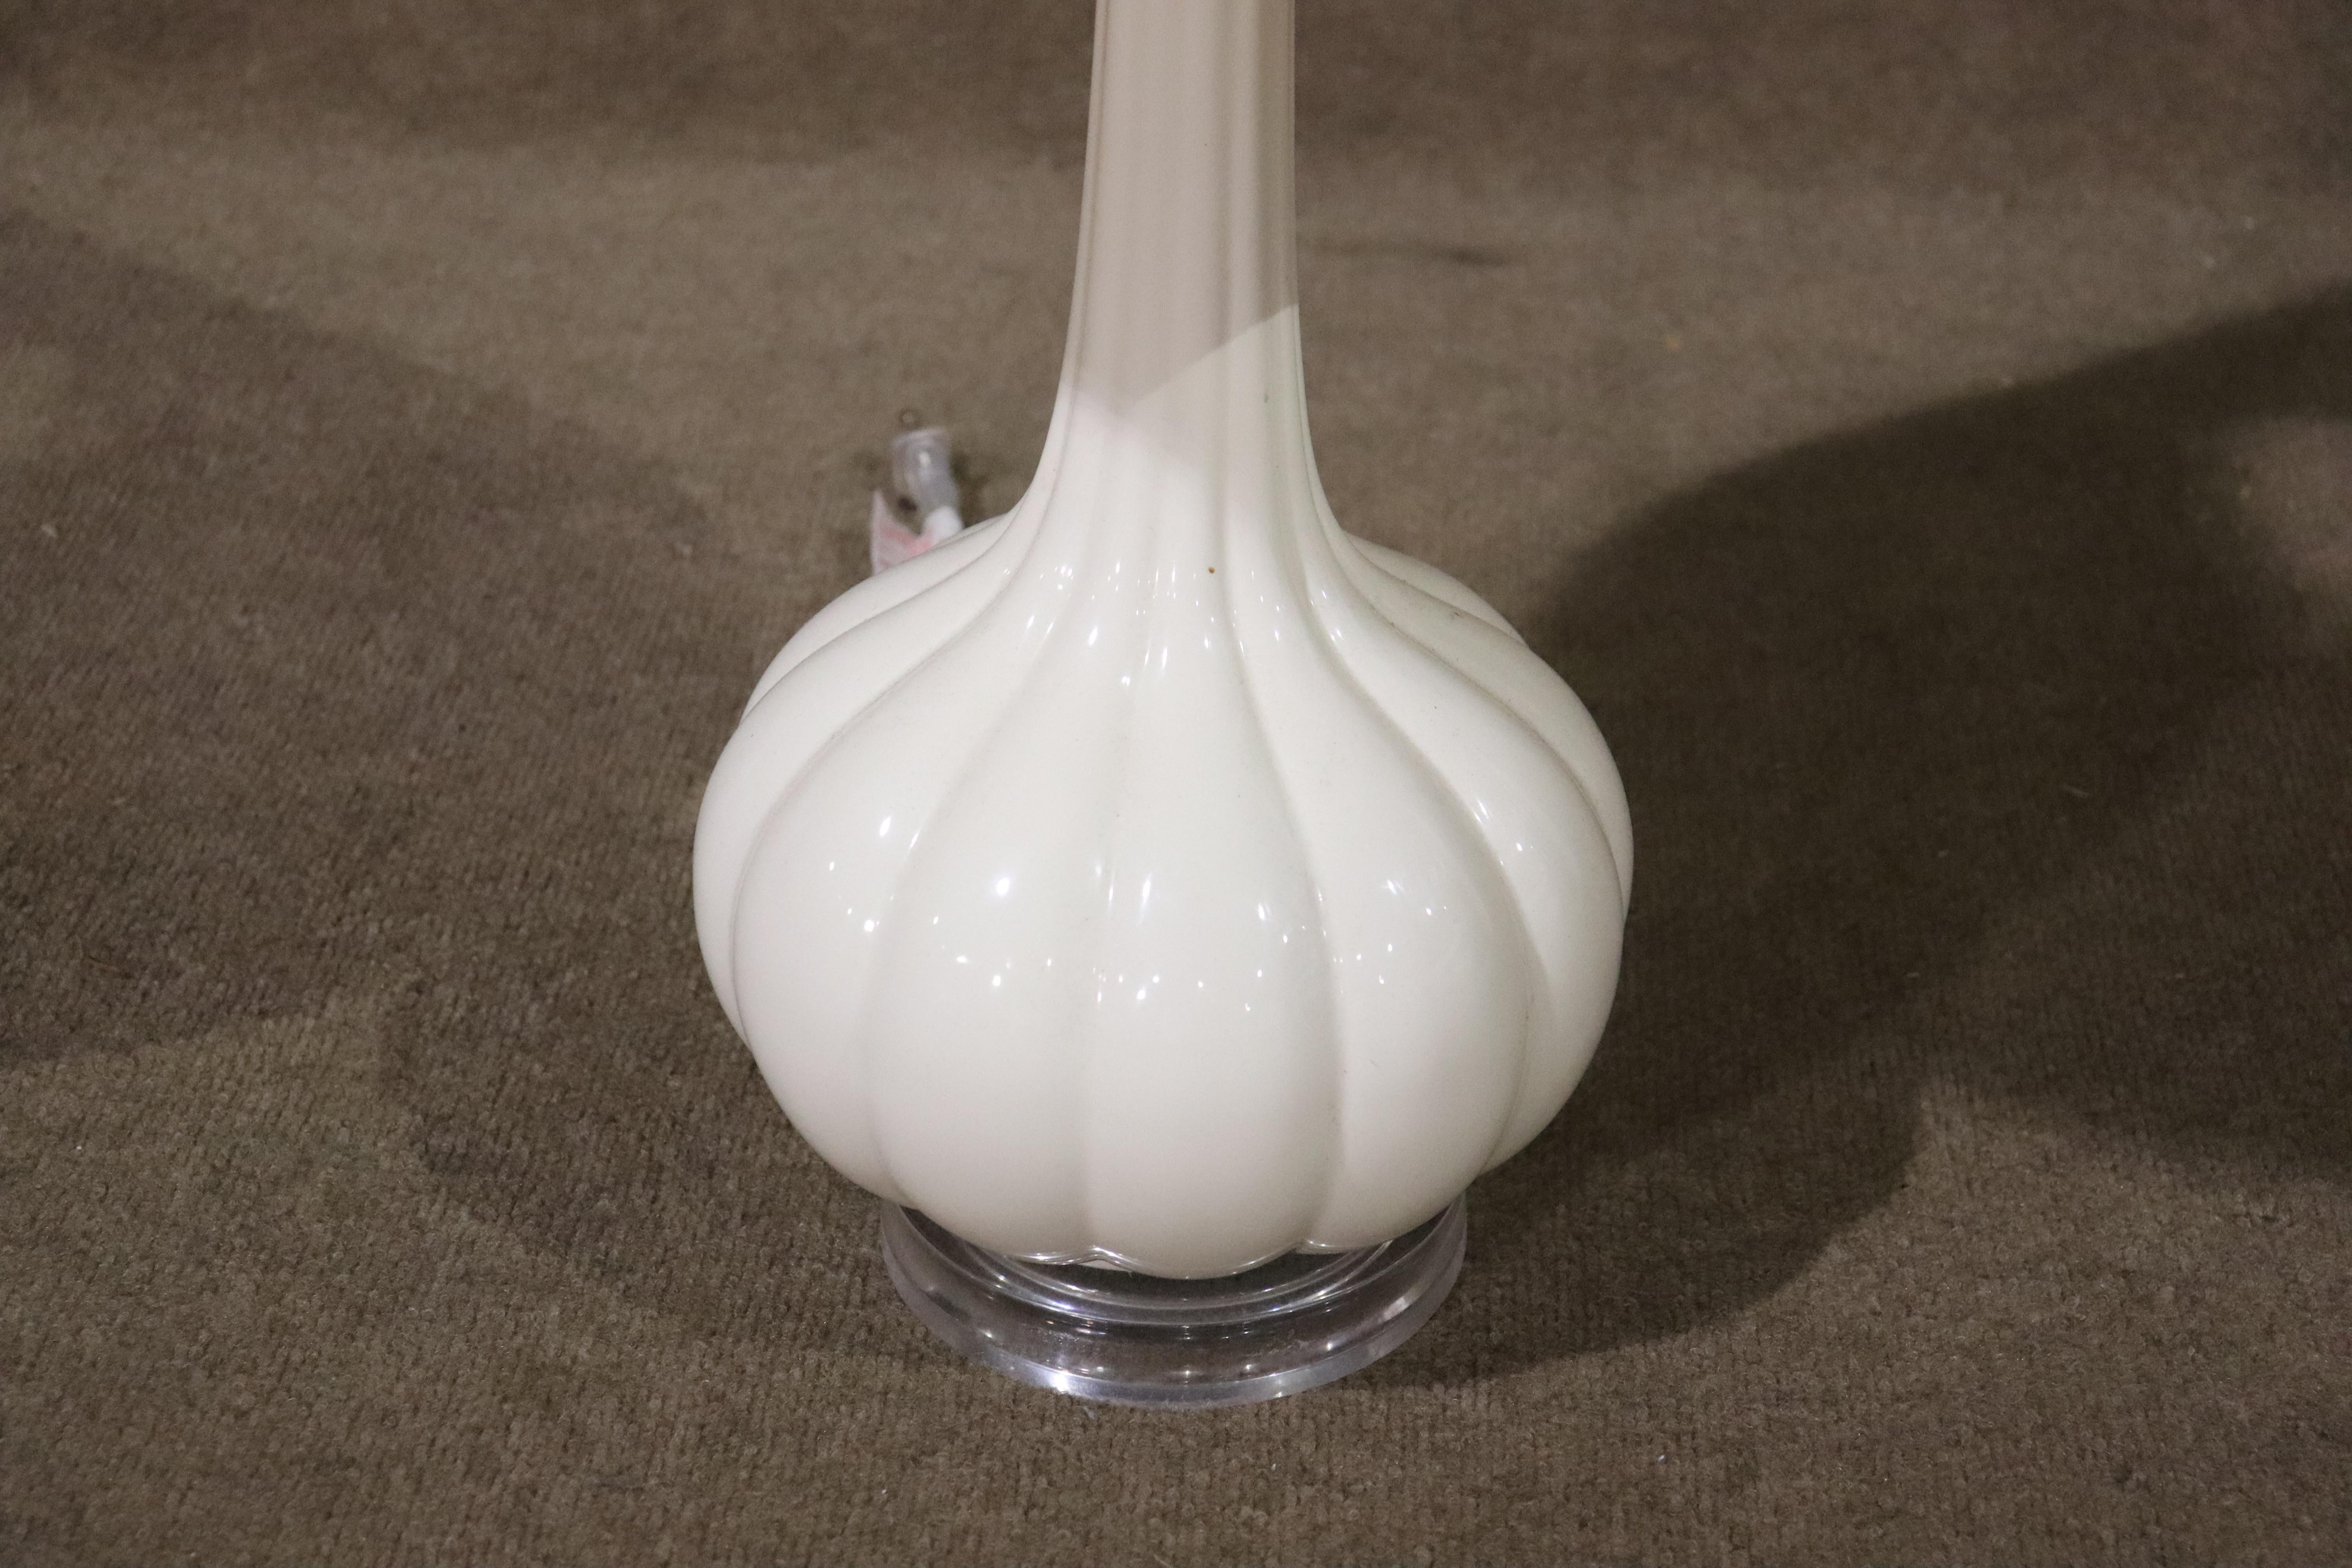 Vintage style table lamp with scallop shaped body on a lucite base.
Please confirm location NY or NJ